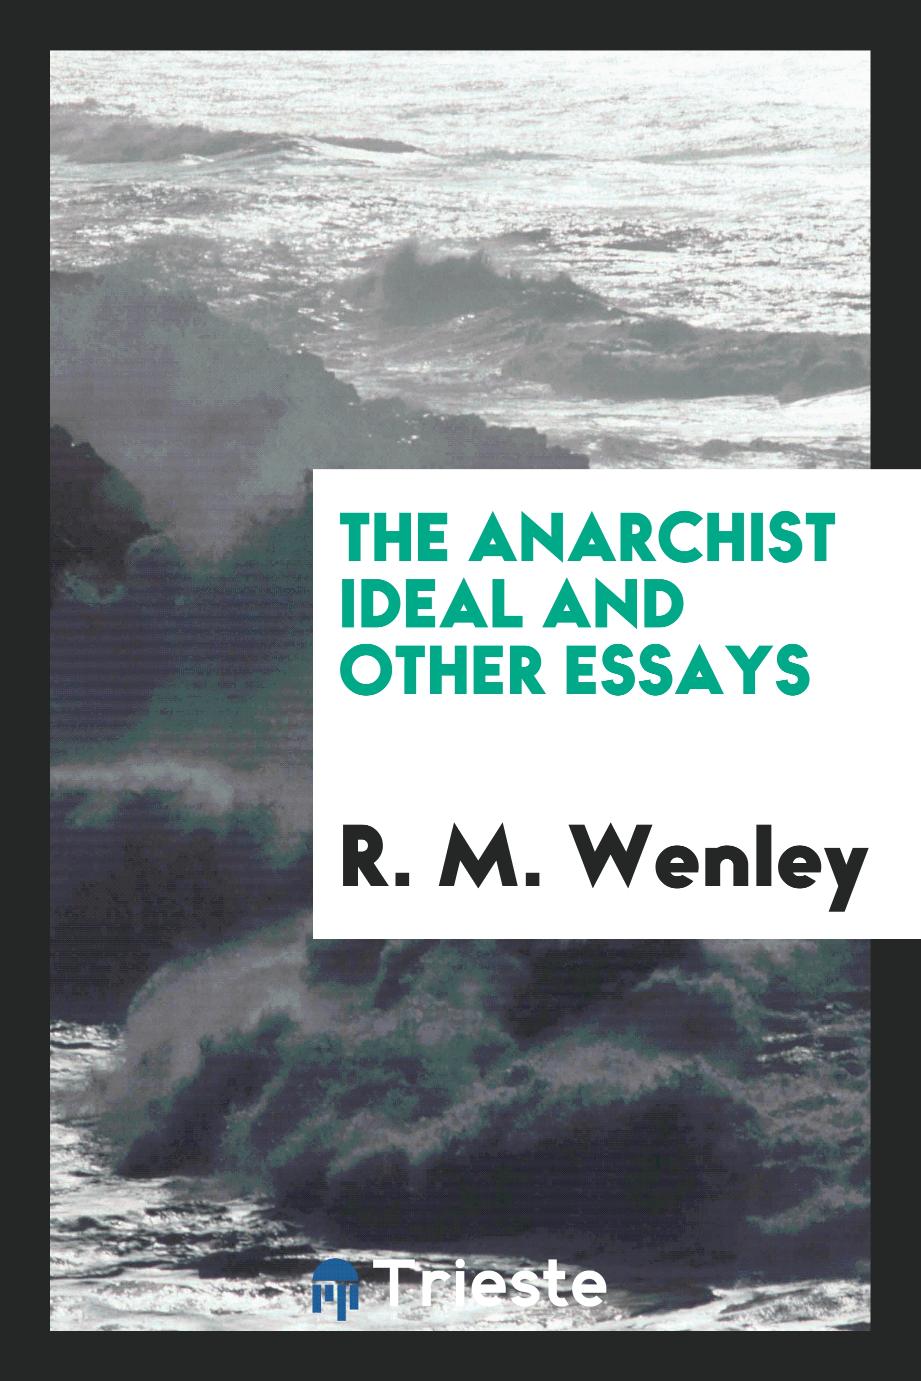 The anarchist ideal and other essays